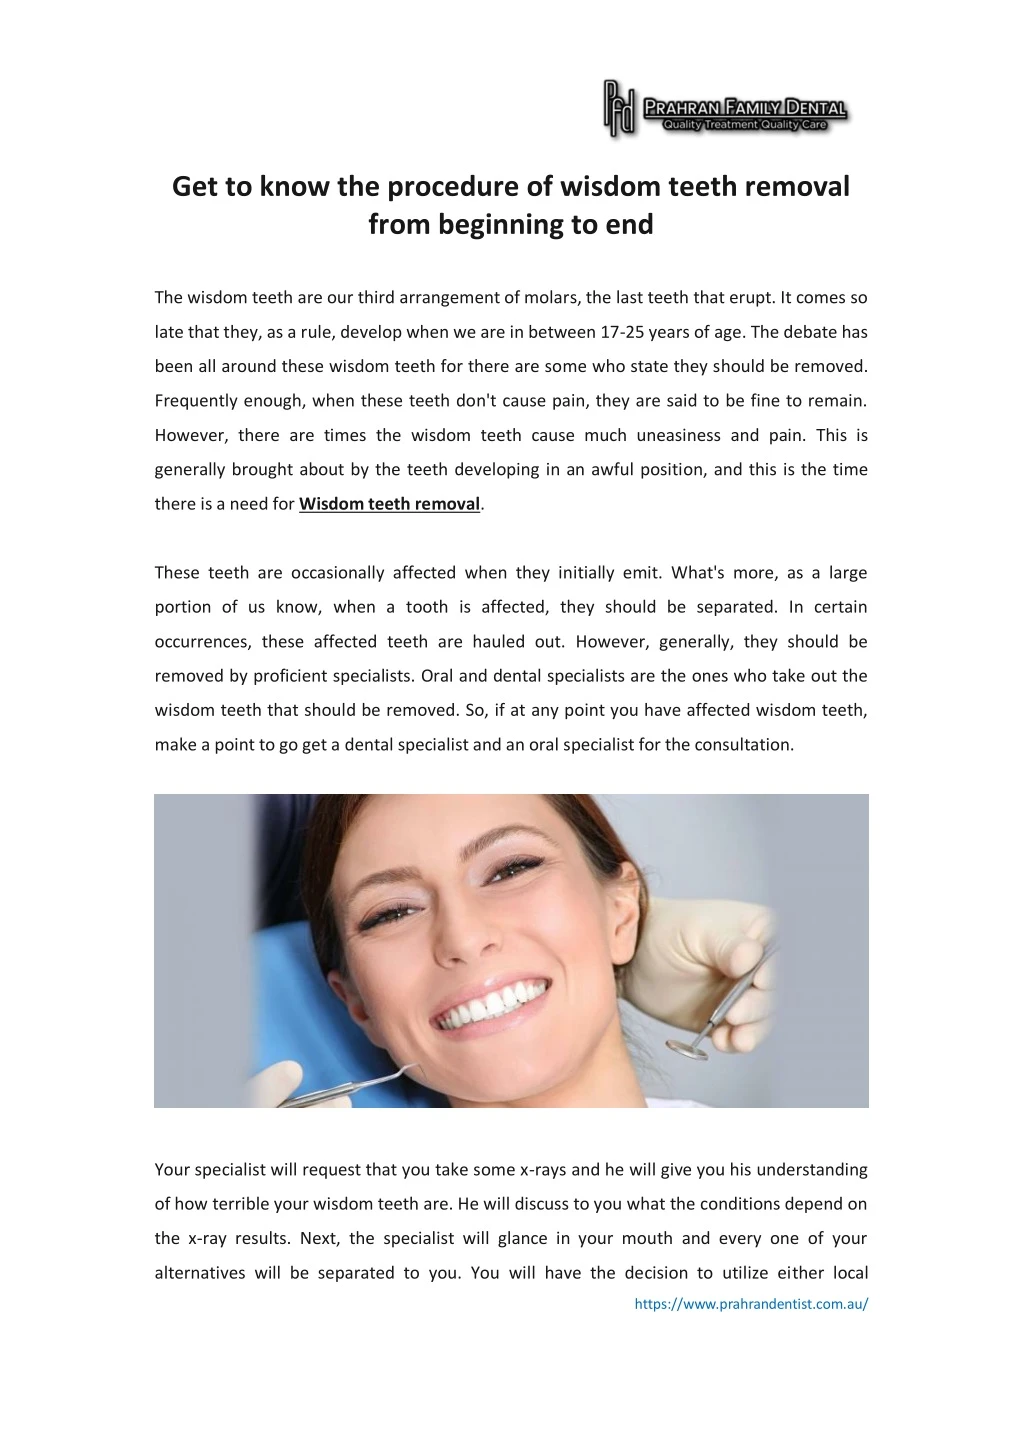 get to know the procedure of wisdom teeth removal